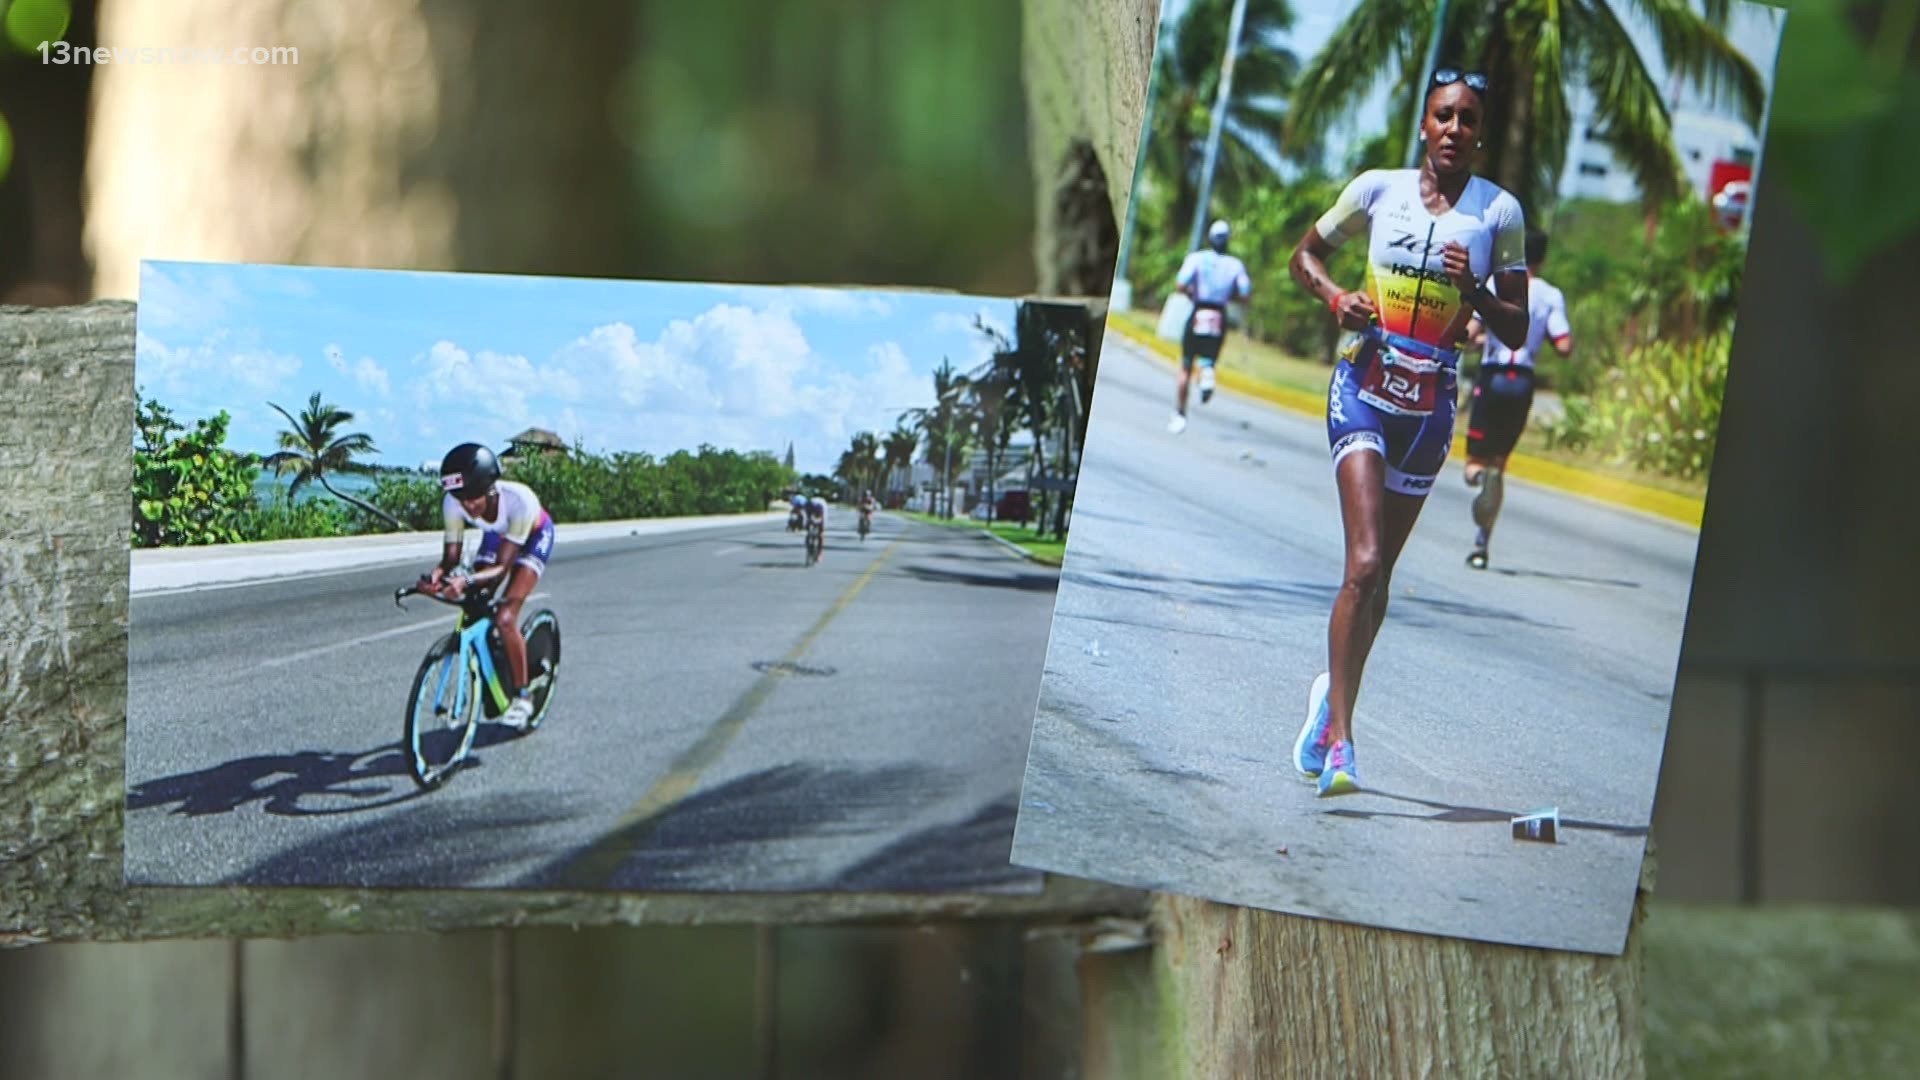 Sika Henry noticed that no African American woman had become a pro triathlete. So she made that goal her mission. Even after a serious accident, she never gave up.